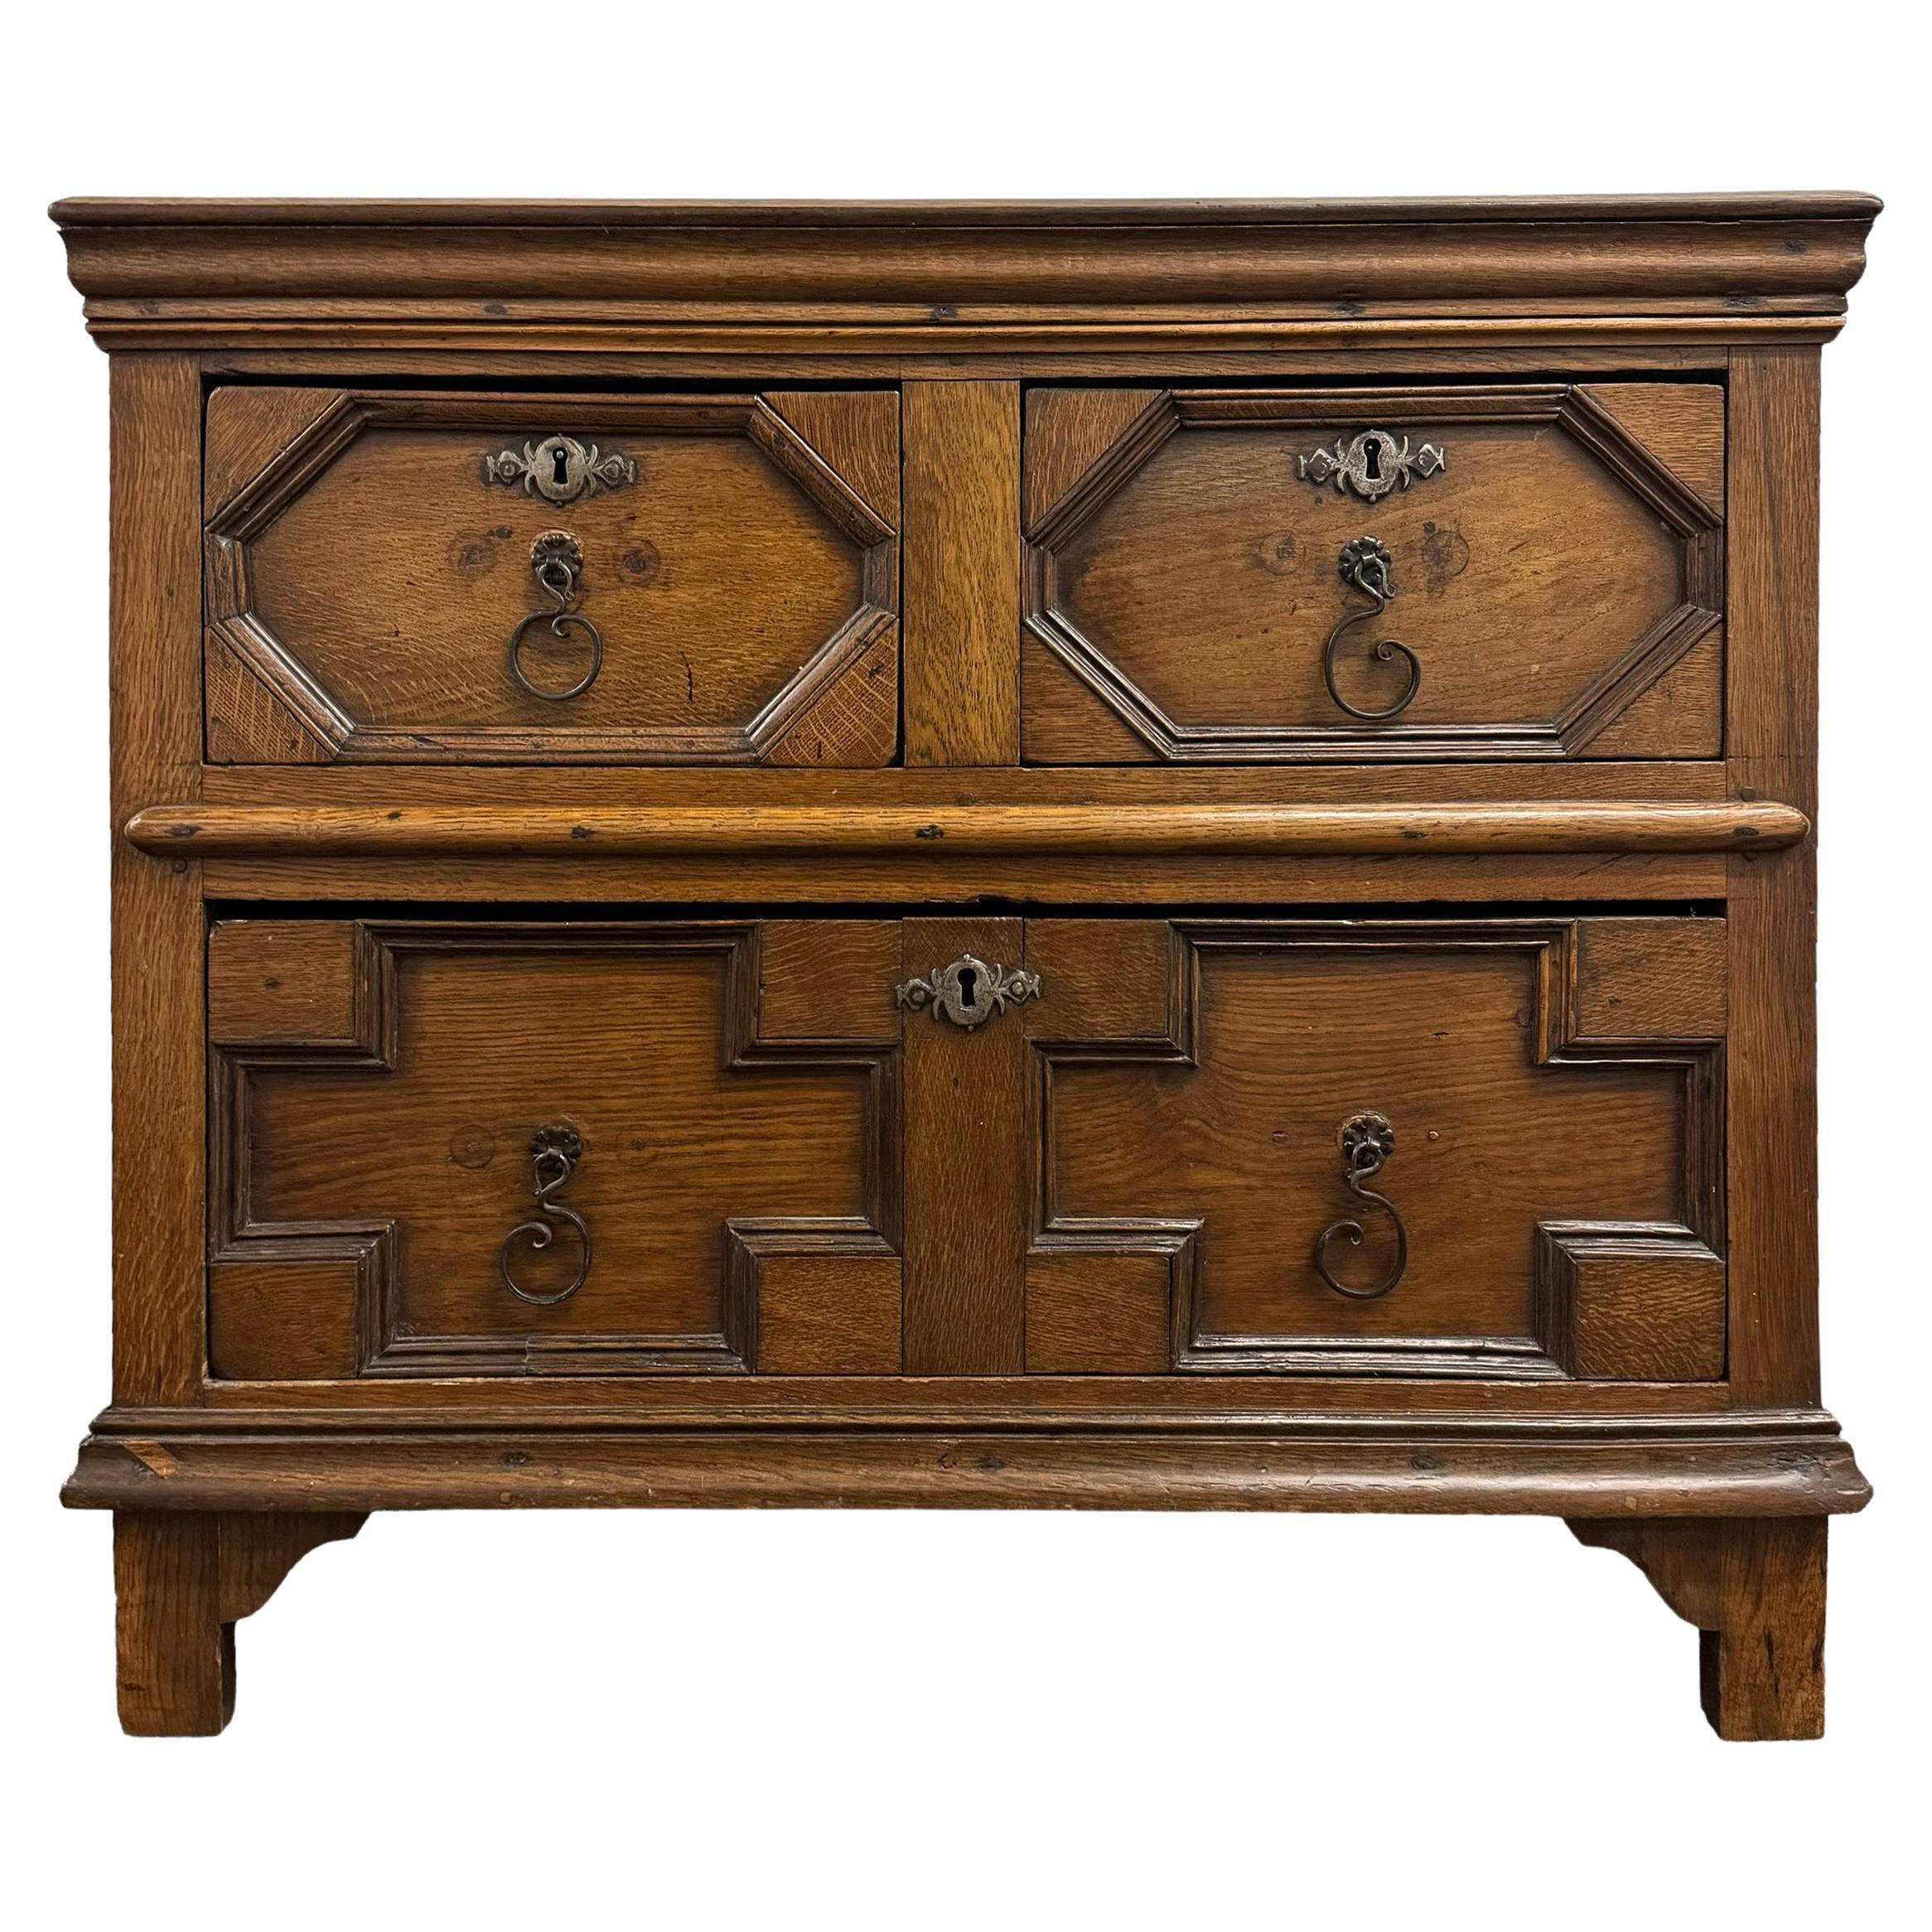 Early 18th Century English William and Mary Chest of Drawers For Sale